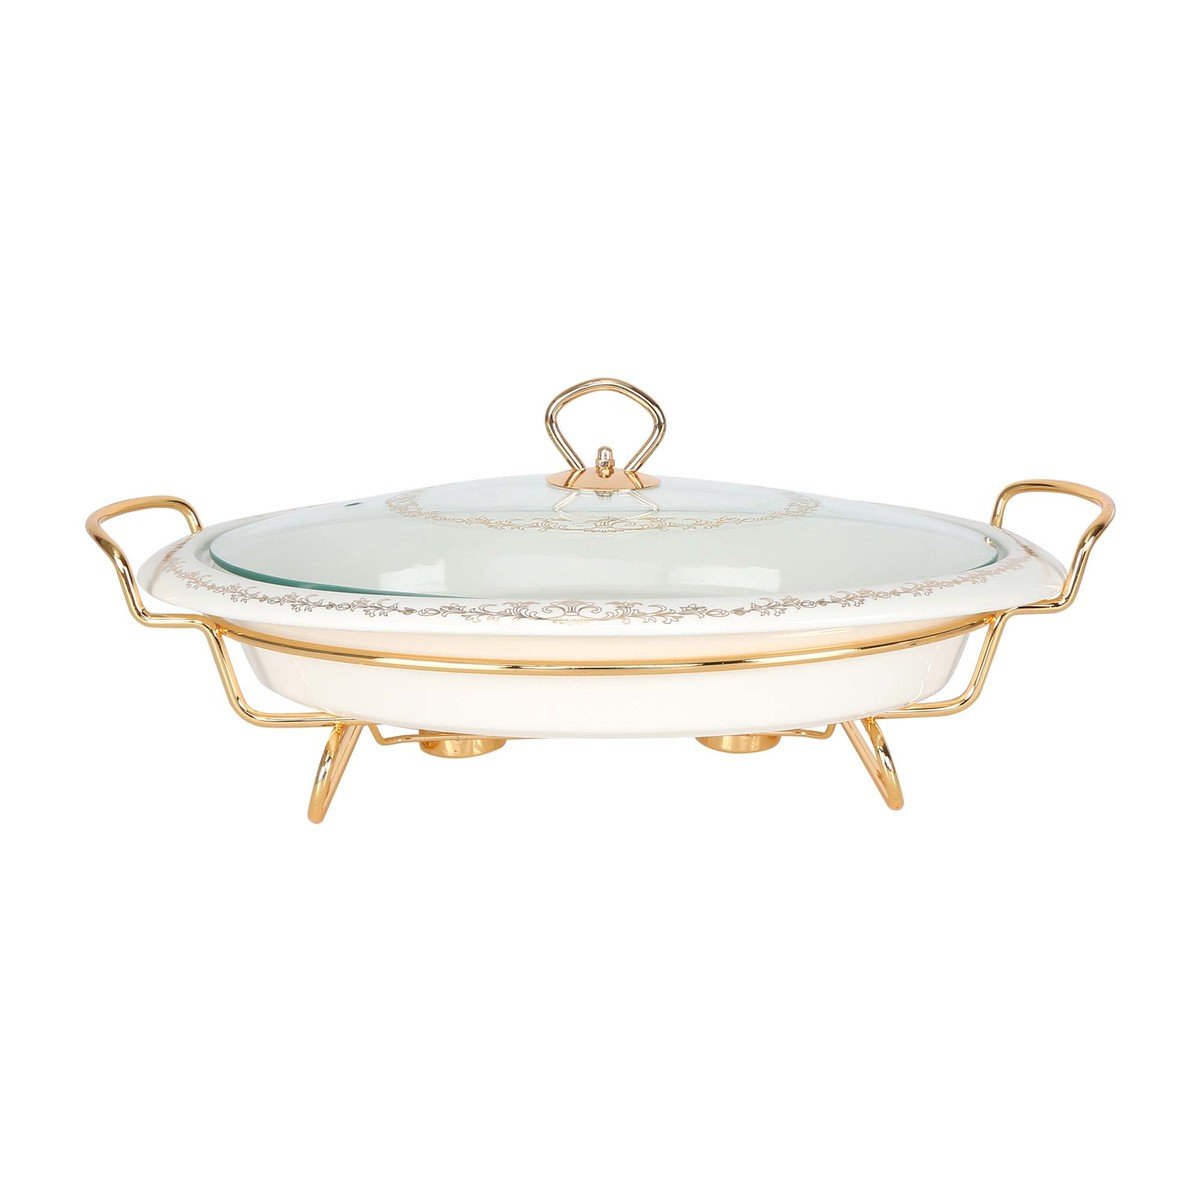 Chefline Casserole with Stand 16in Oval CX2456